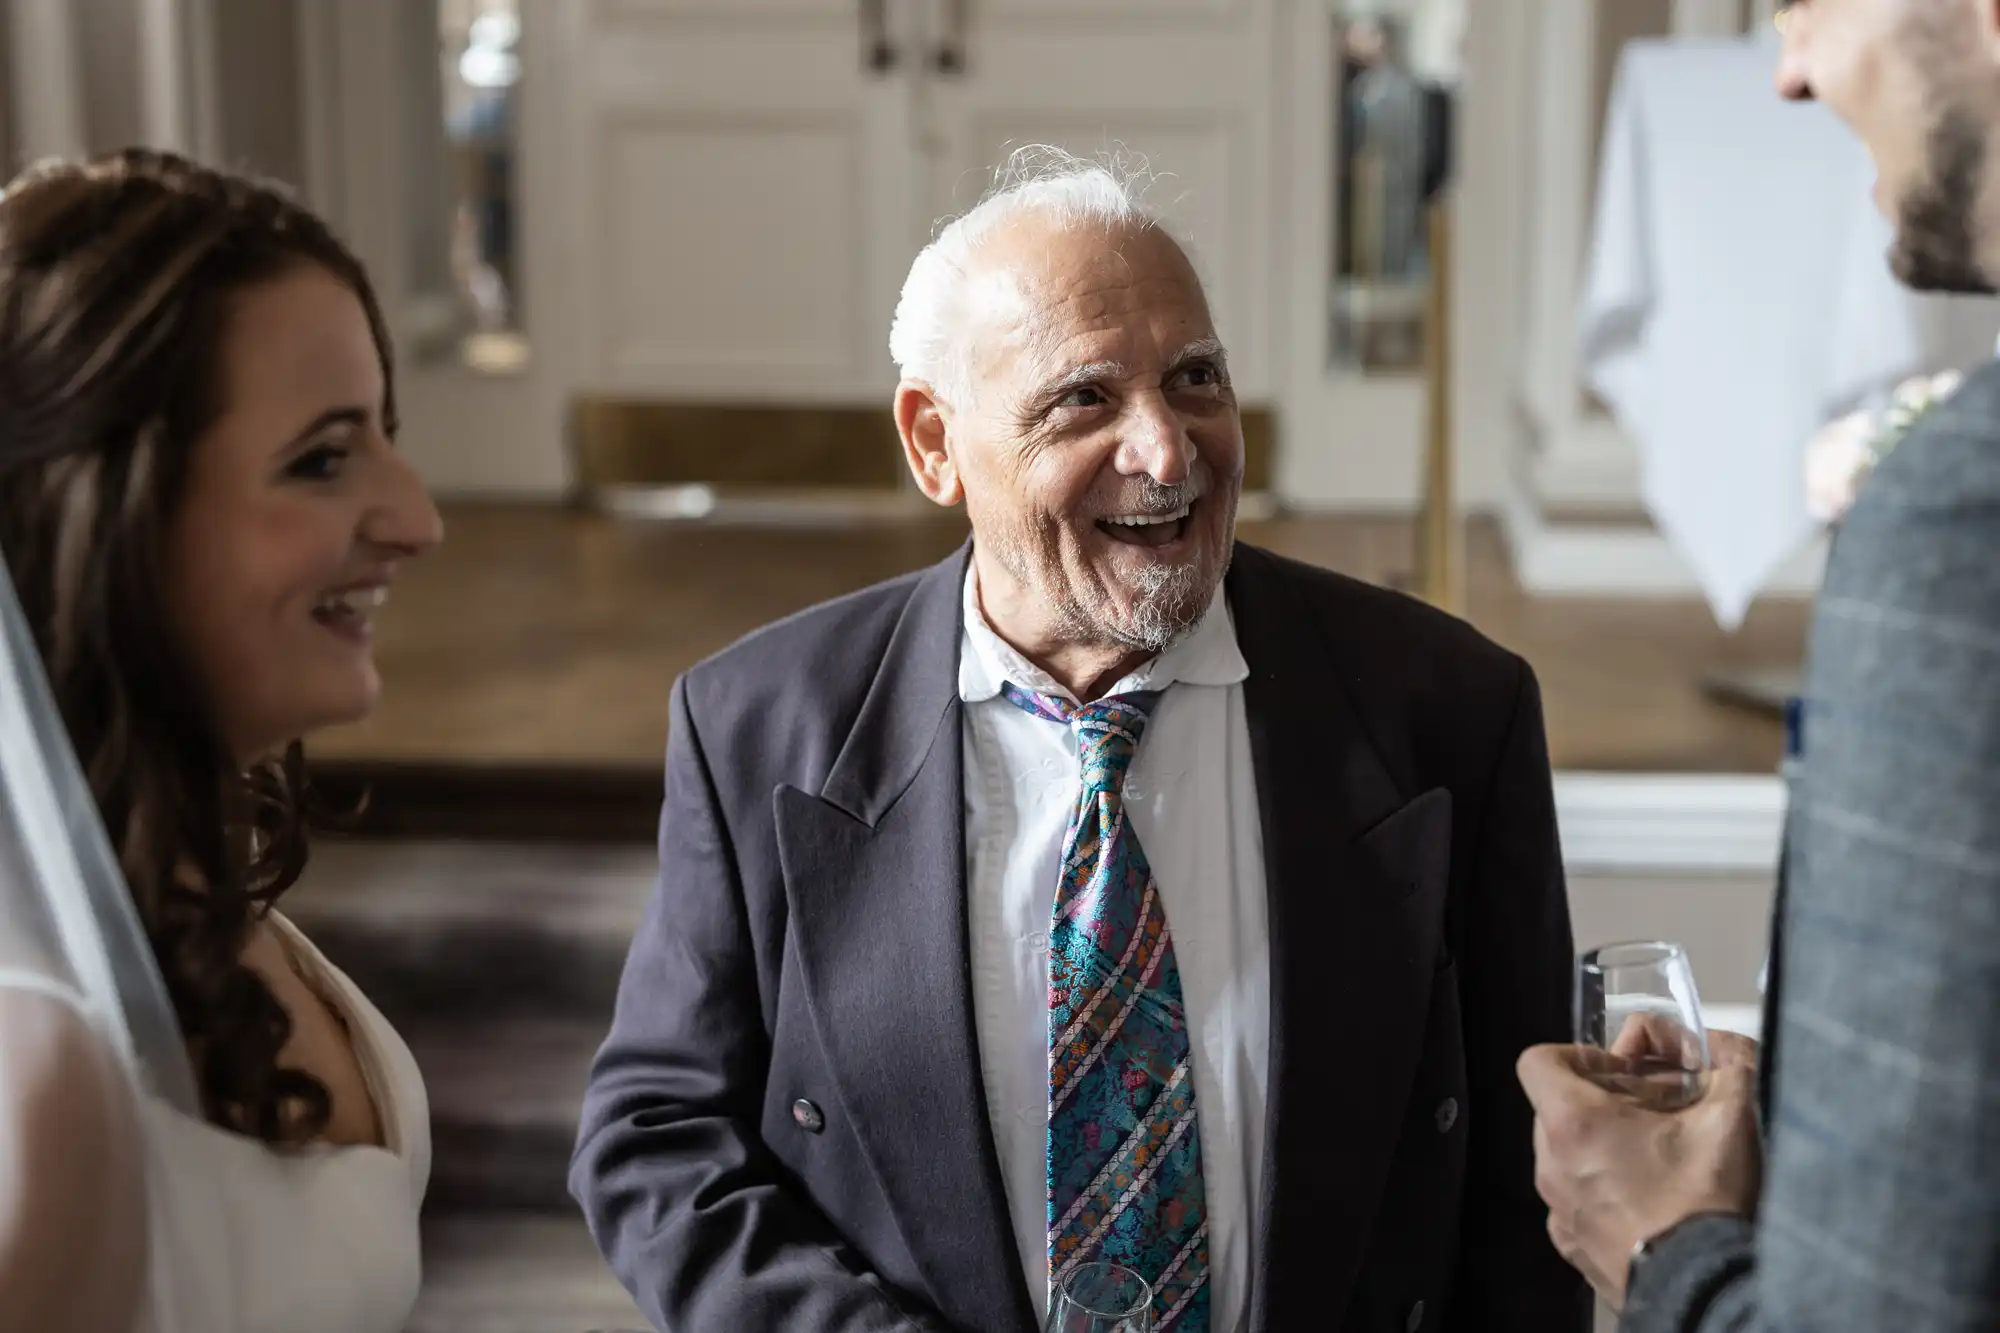 An elderly man in a suit smiling joyfully during a conversation with a bride and groom at a wedding reception.